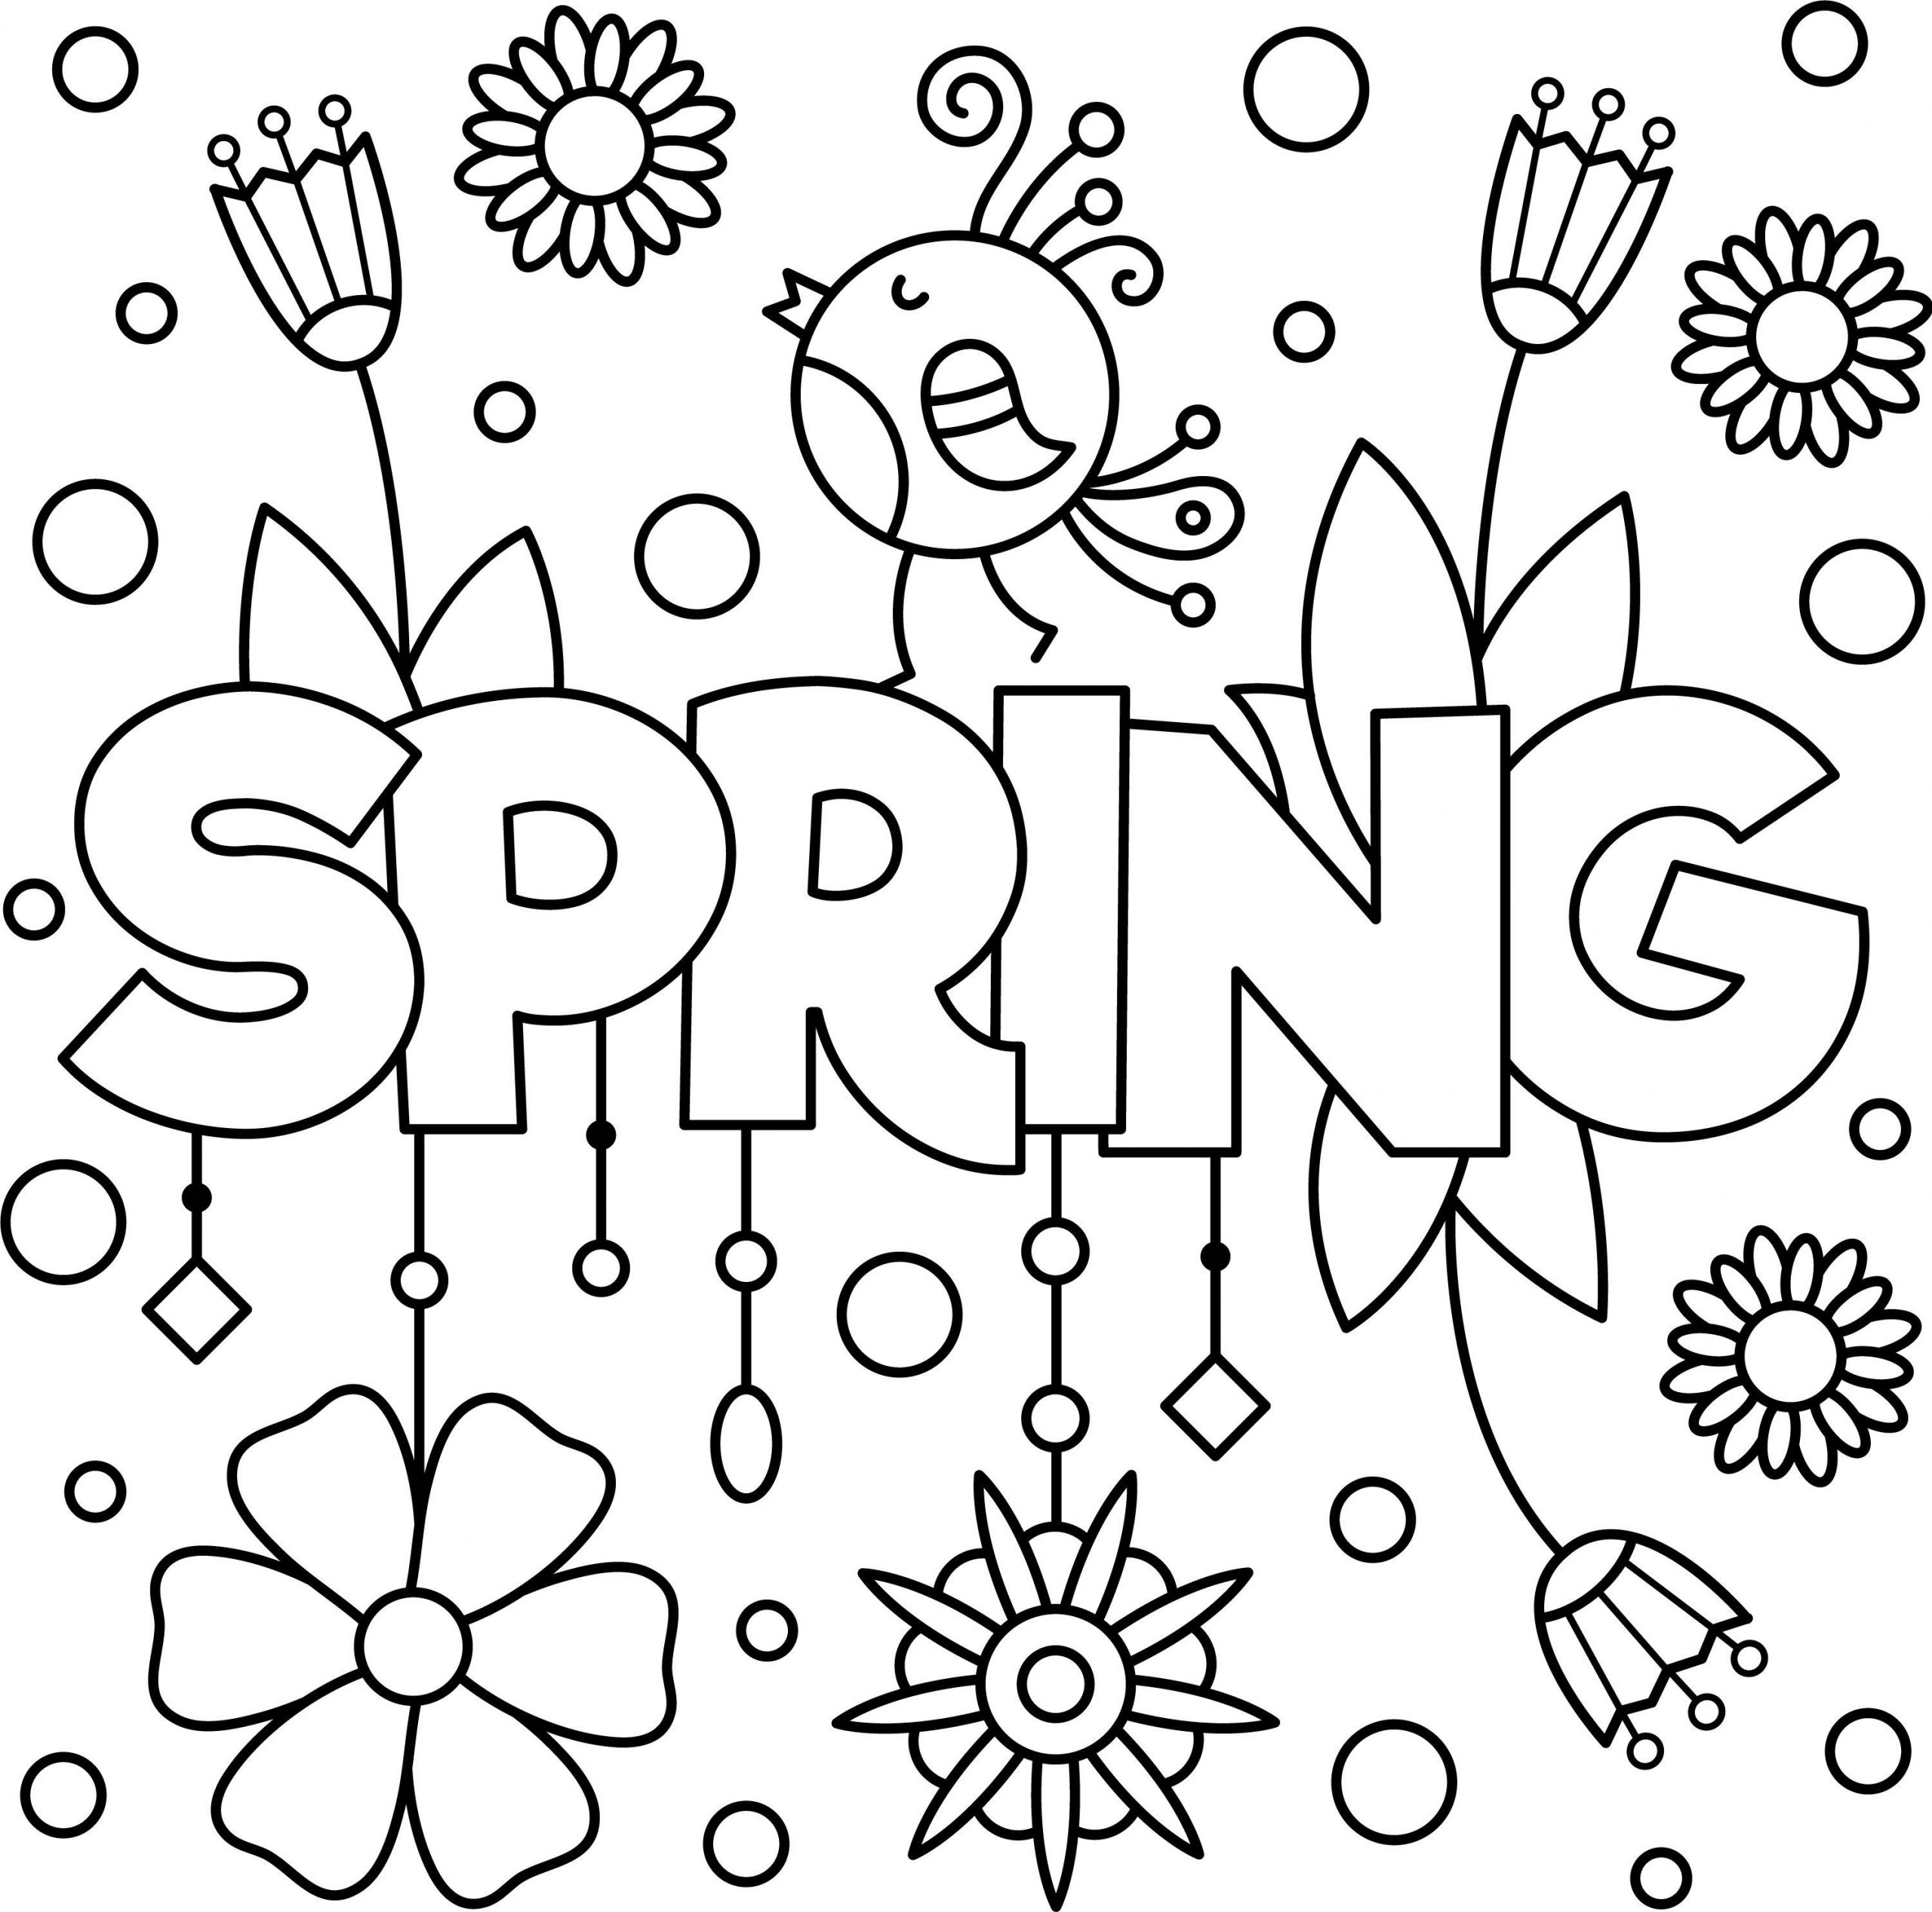 coloring-pages-spring-coloring-pages-for-kids-disneyntable-pictures-free-to-scaled